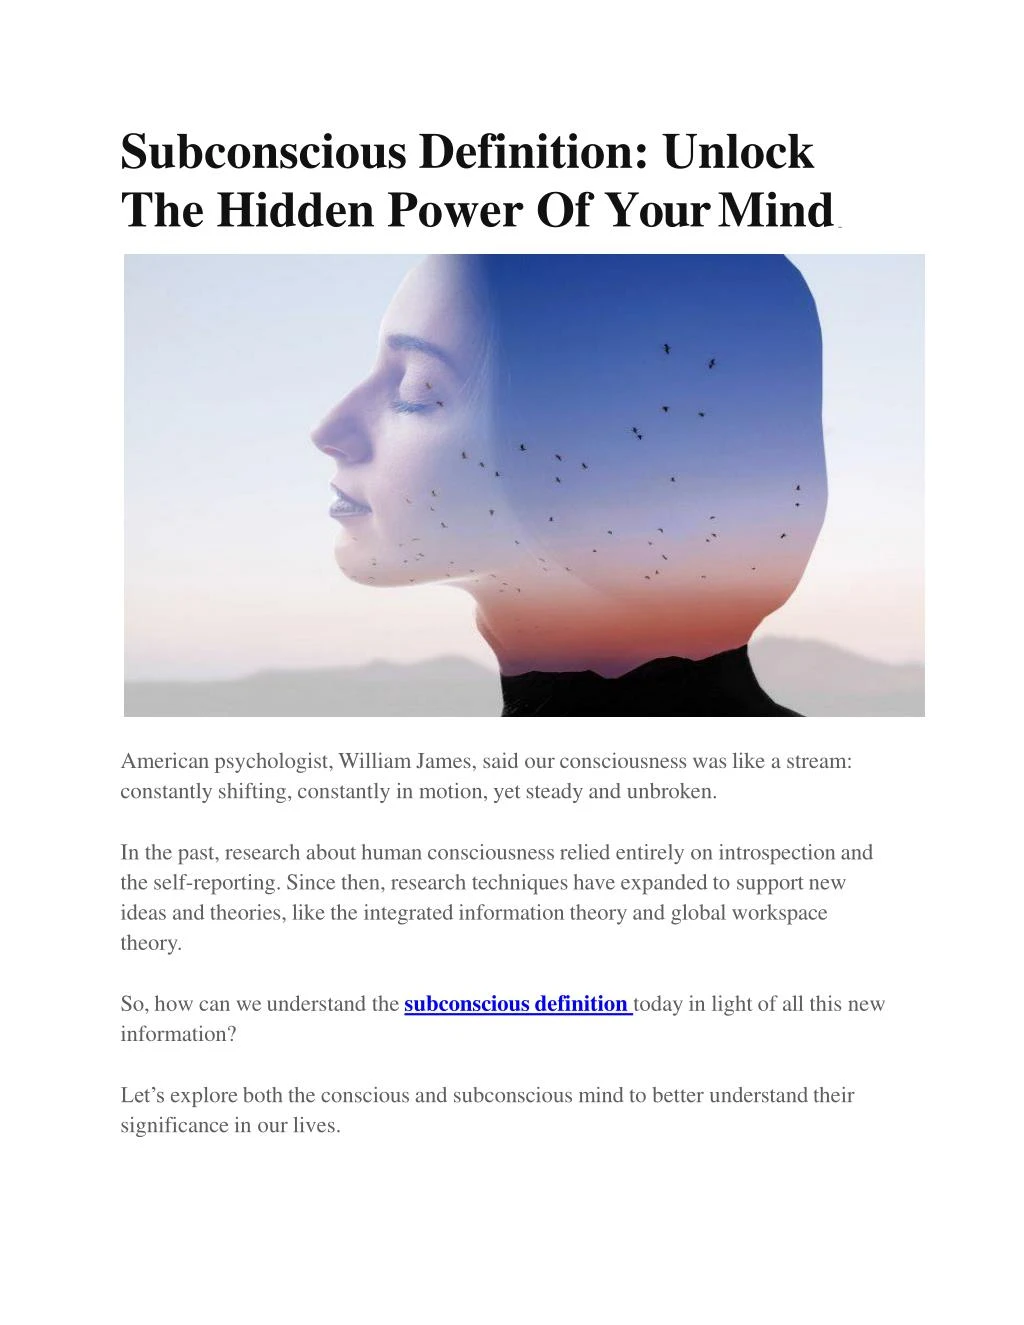 subconscious definition unlock the hidden power of your mind